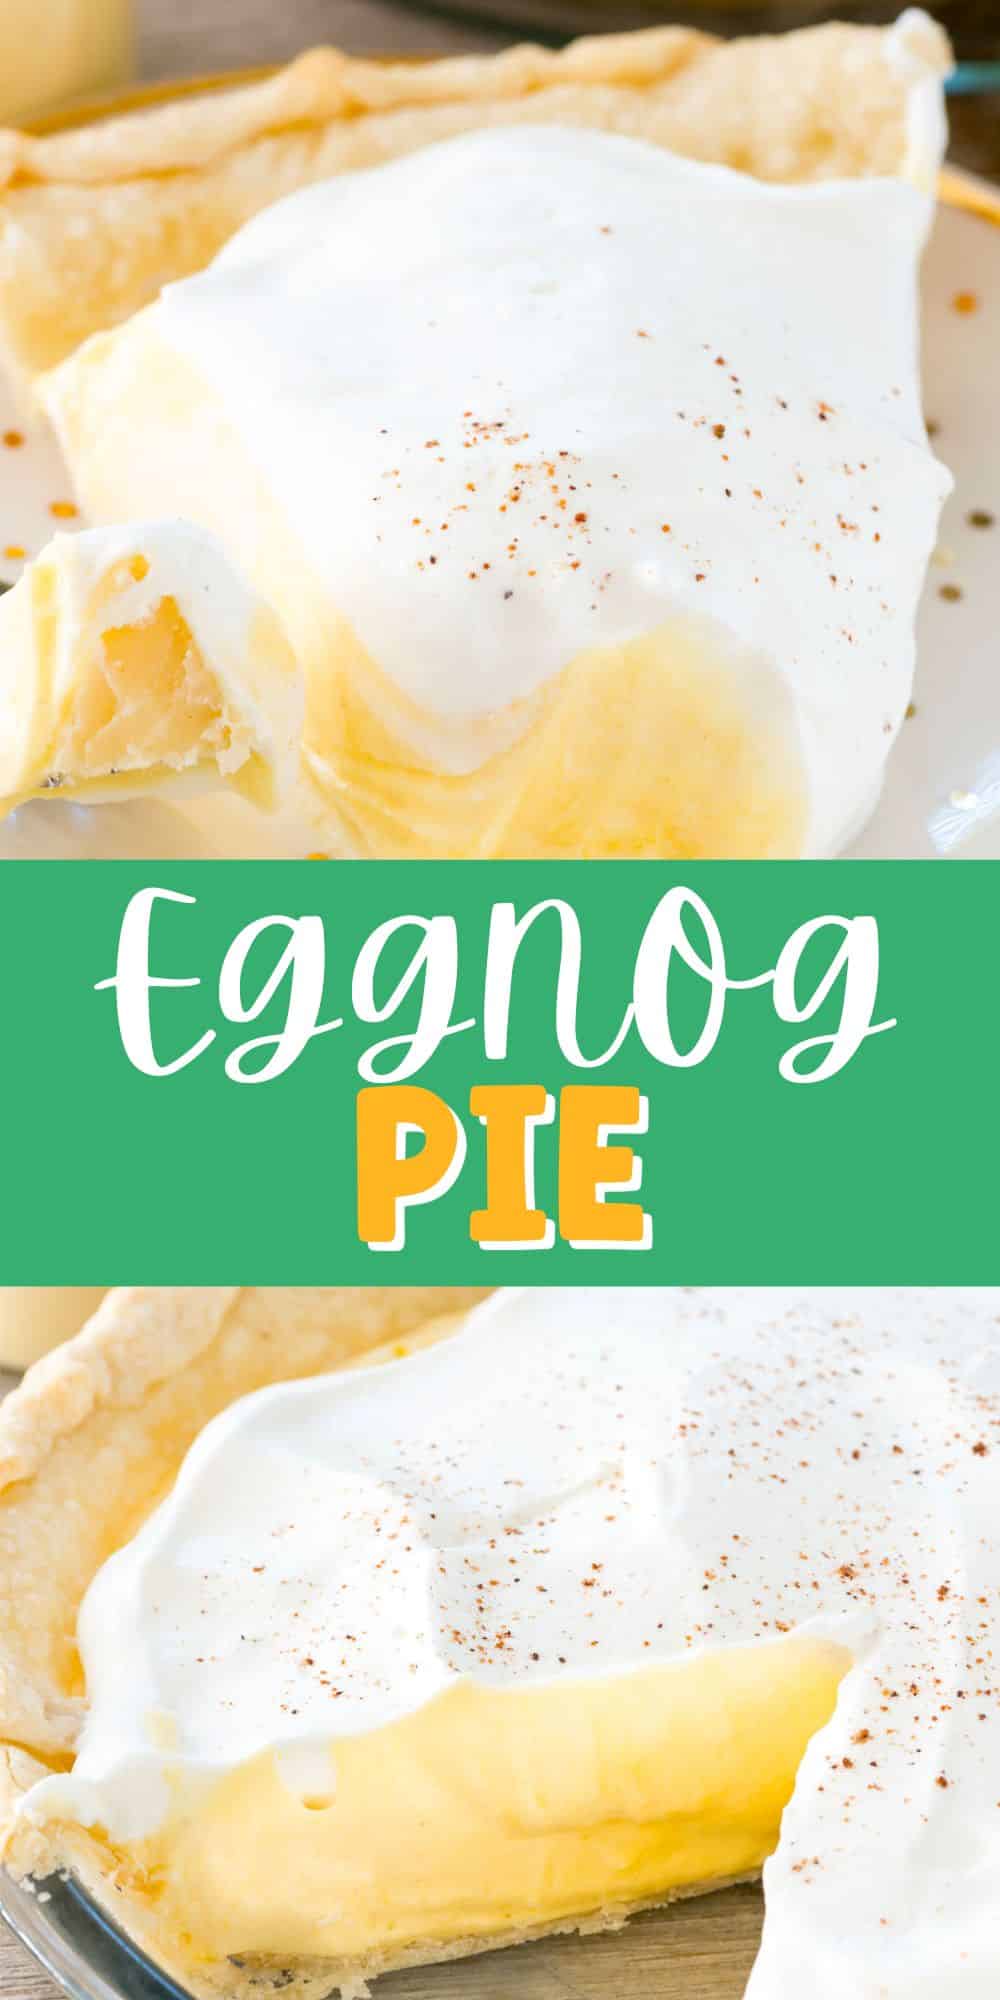 two photos of eggnog pie with white cream on top and words in the center